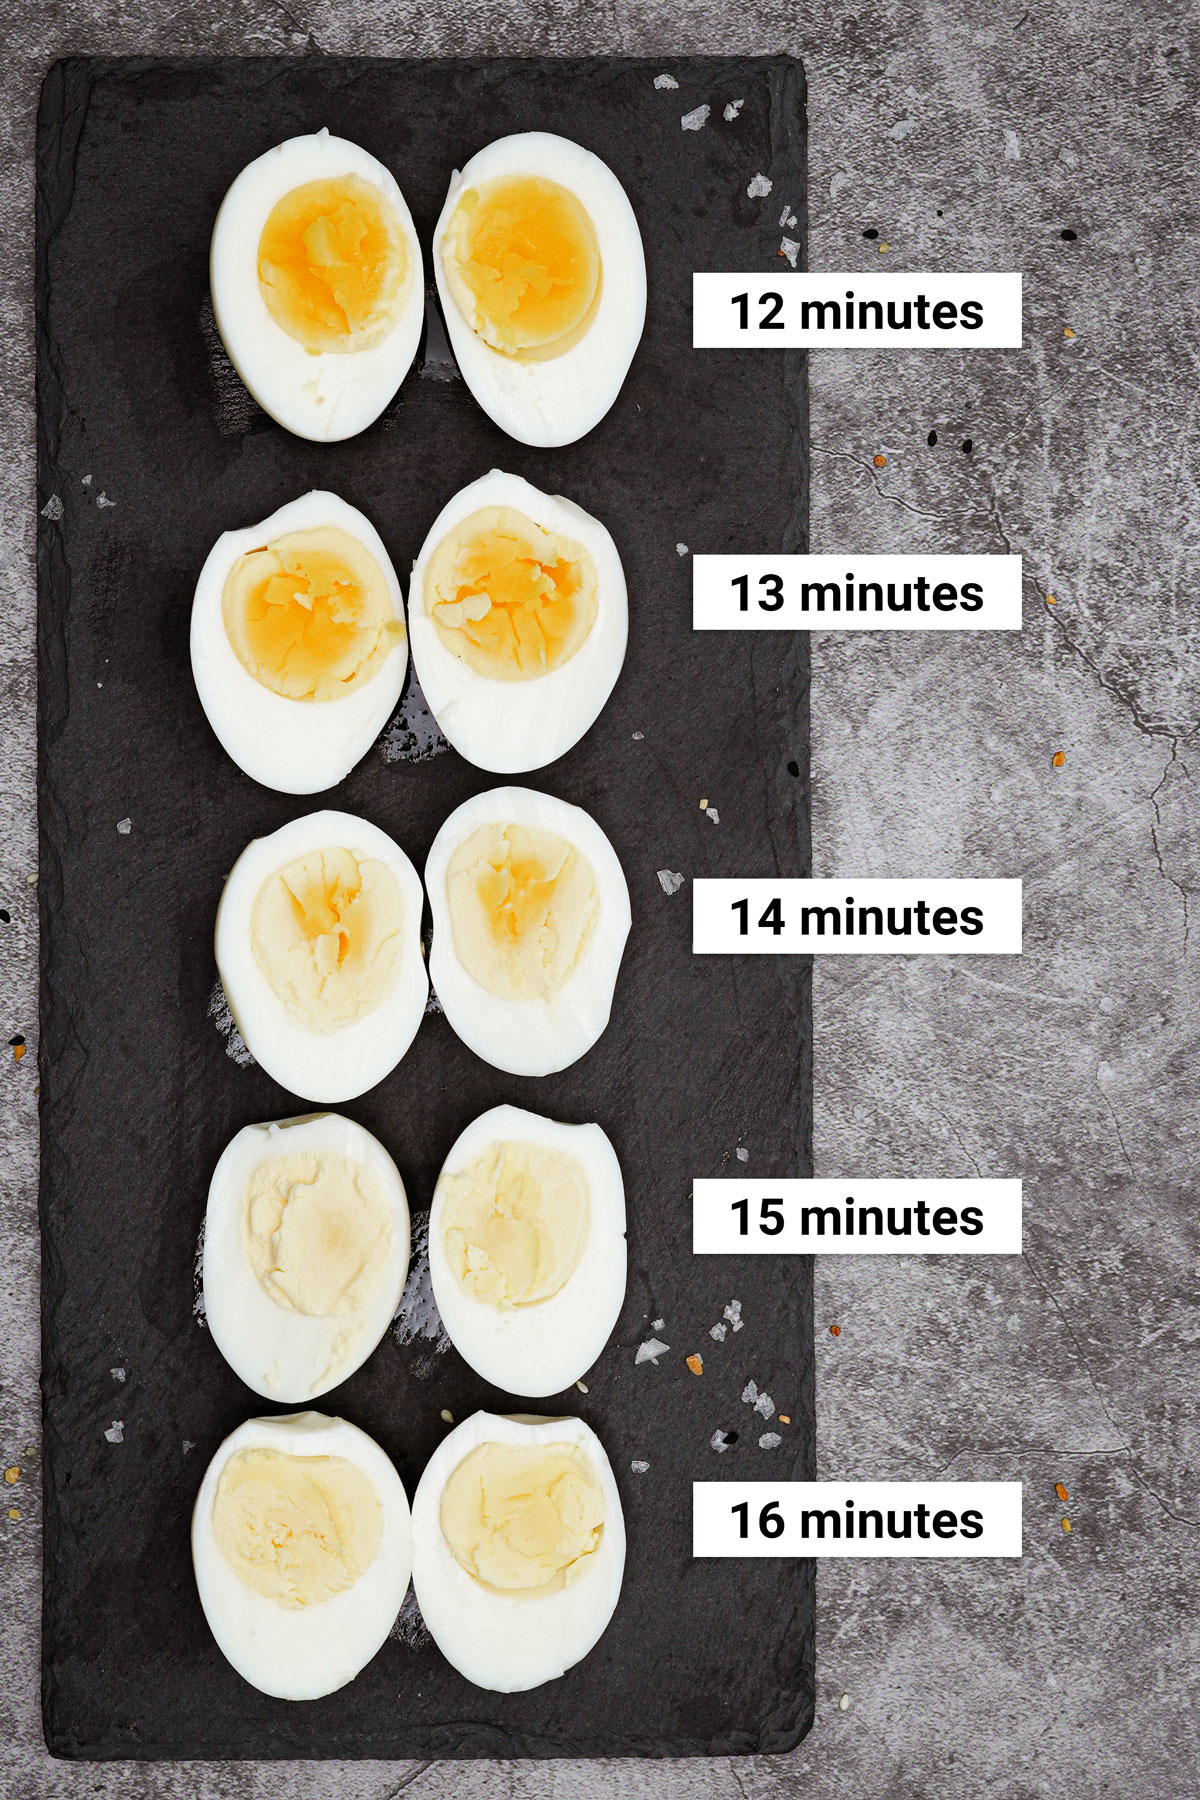 Recommended cooking times of boiled eggs in the air fryer